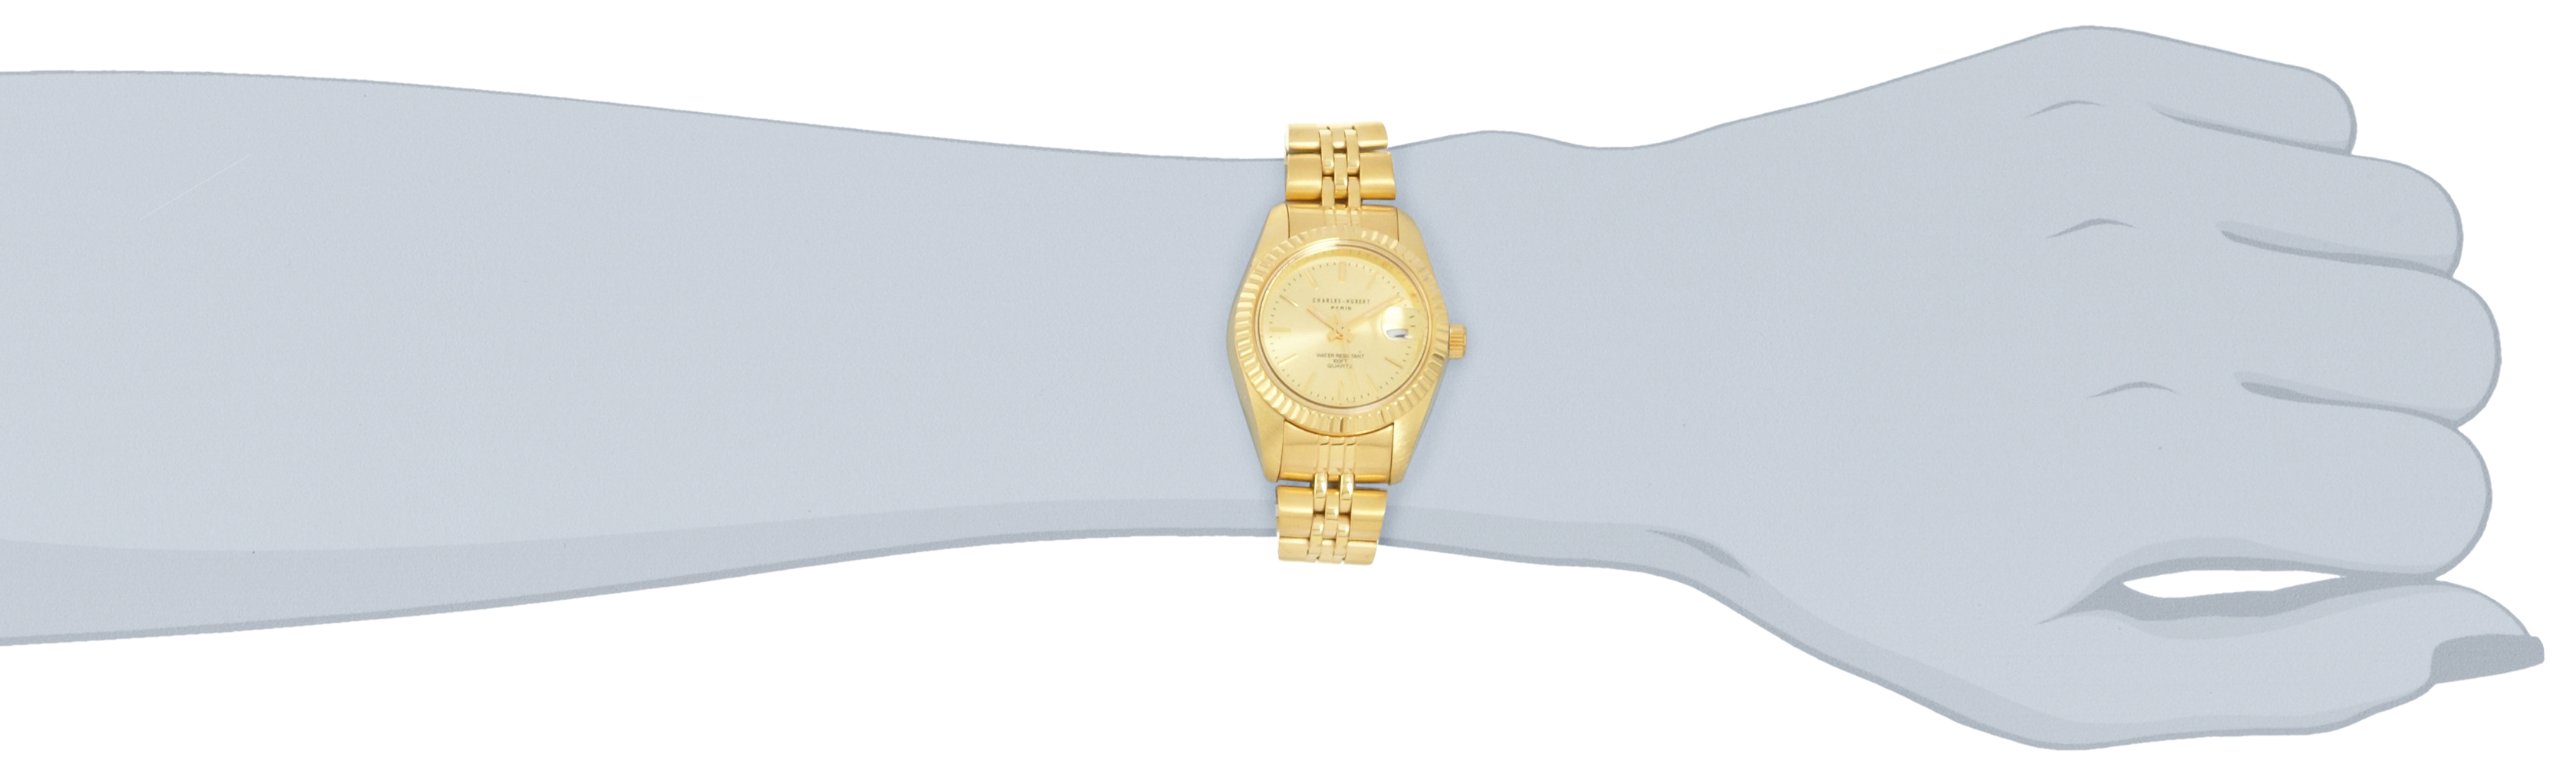 Charles-Hubert, Paris Women's 6444 Classic Collection Gold-Plated Stainless Steel Watch